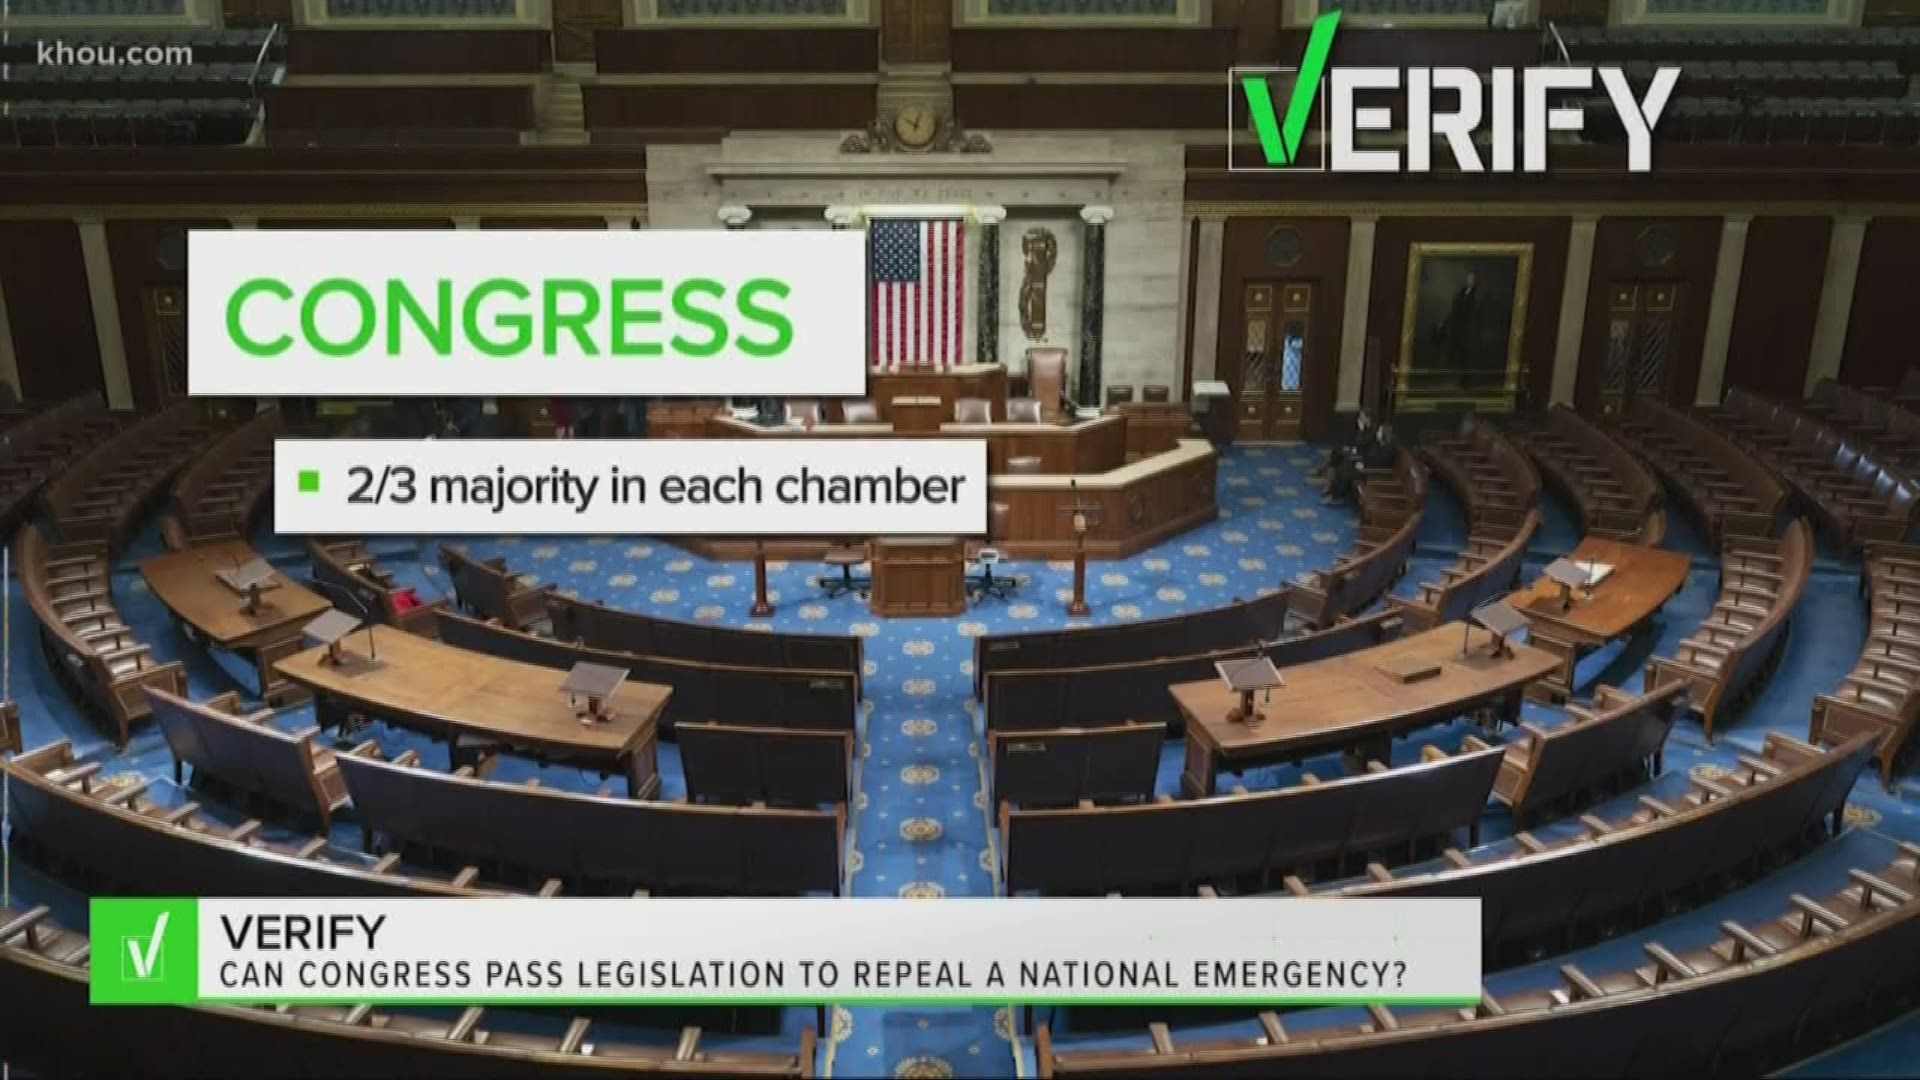 Now that the president has declared a national emergency, can the Democrats do anything to stop the border wall? You asked, and our Verify team looked into it.